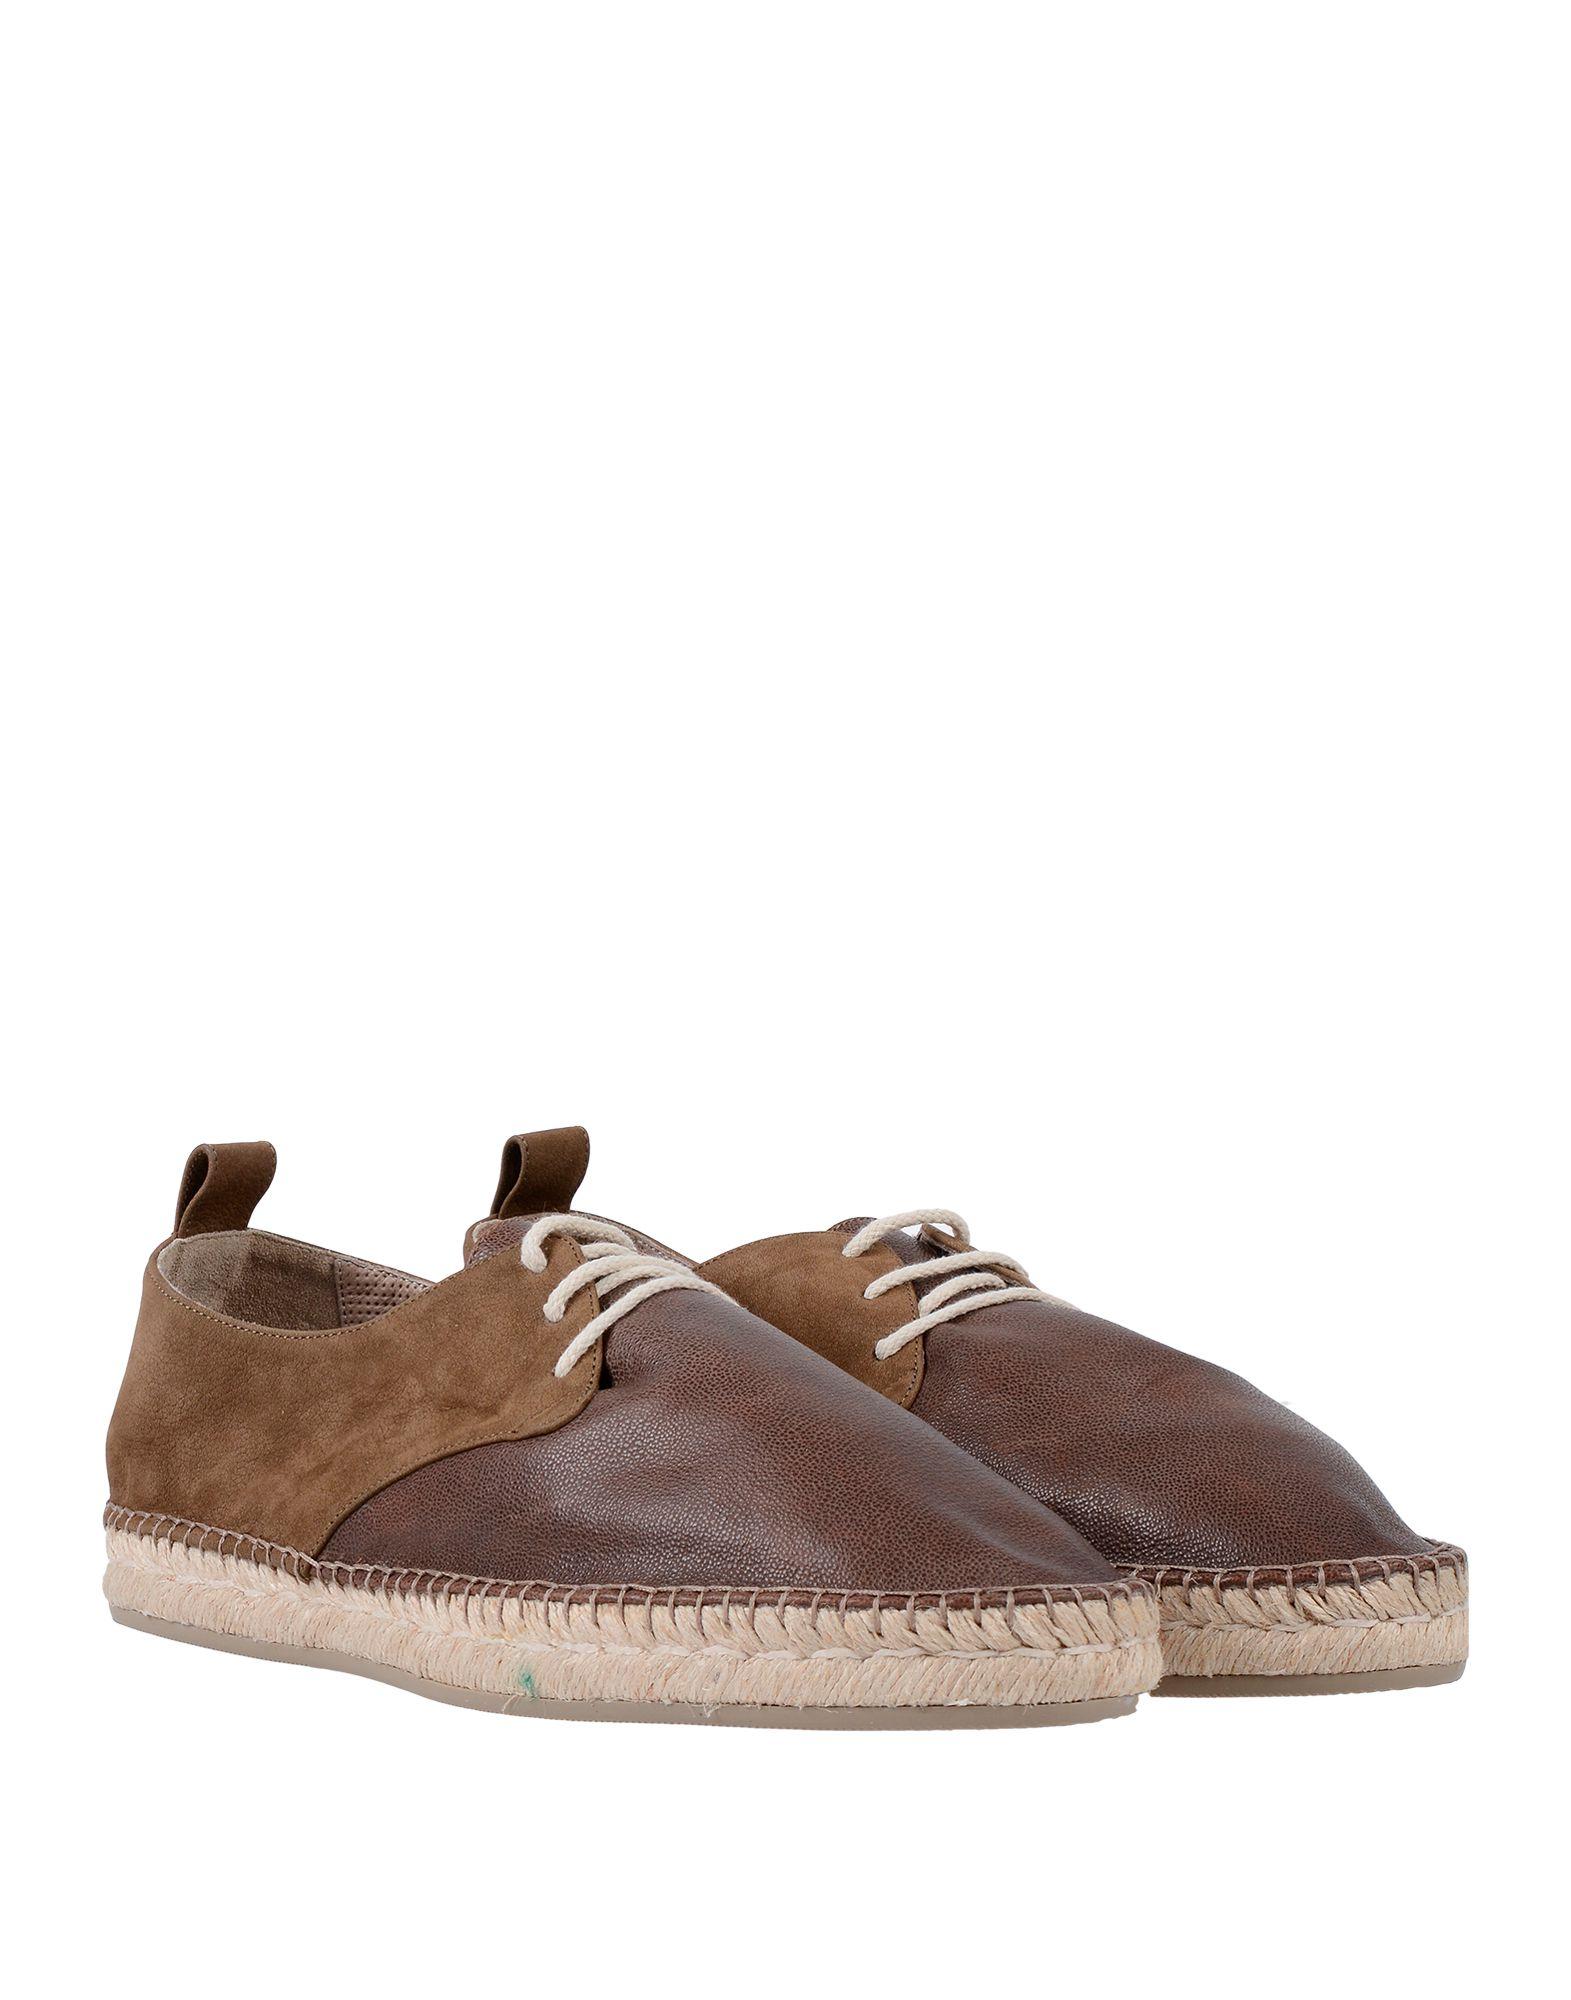 Lyst - Brunello Cucinelli Lace-up Shoe in Brown for Men